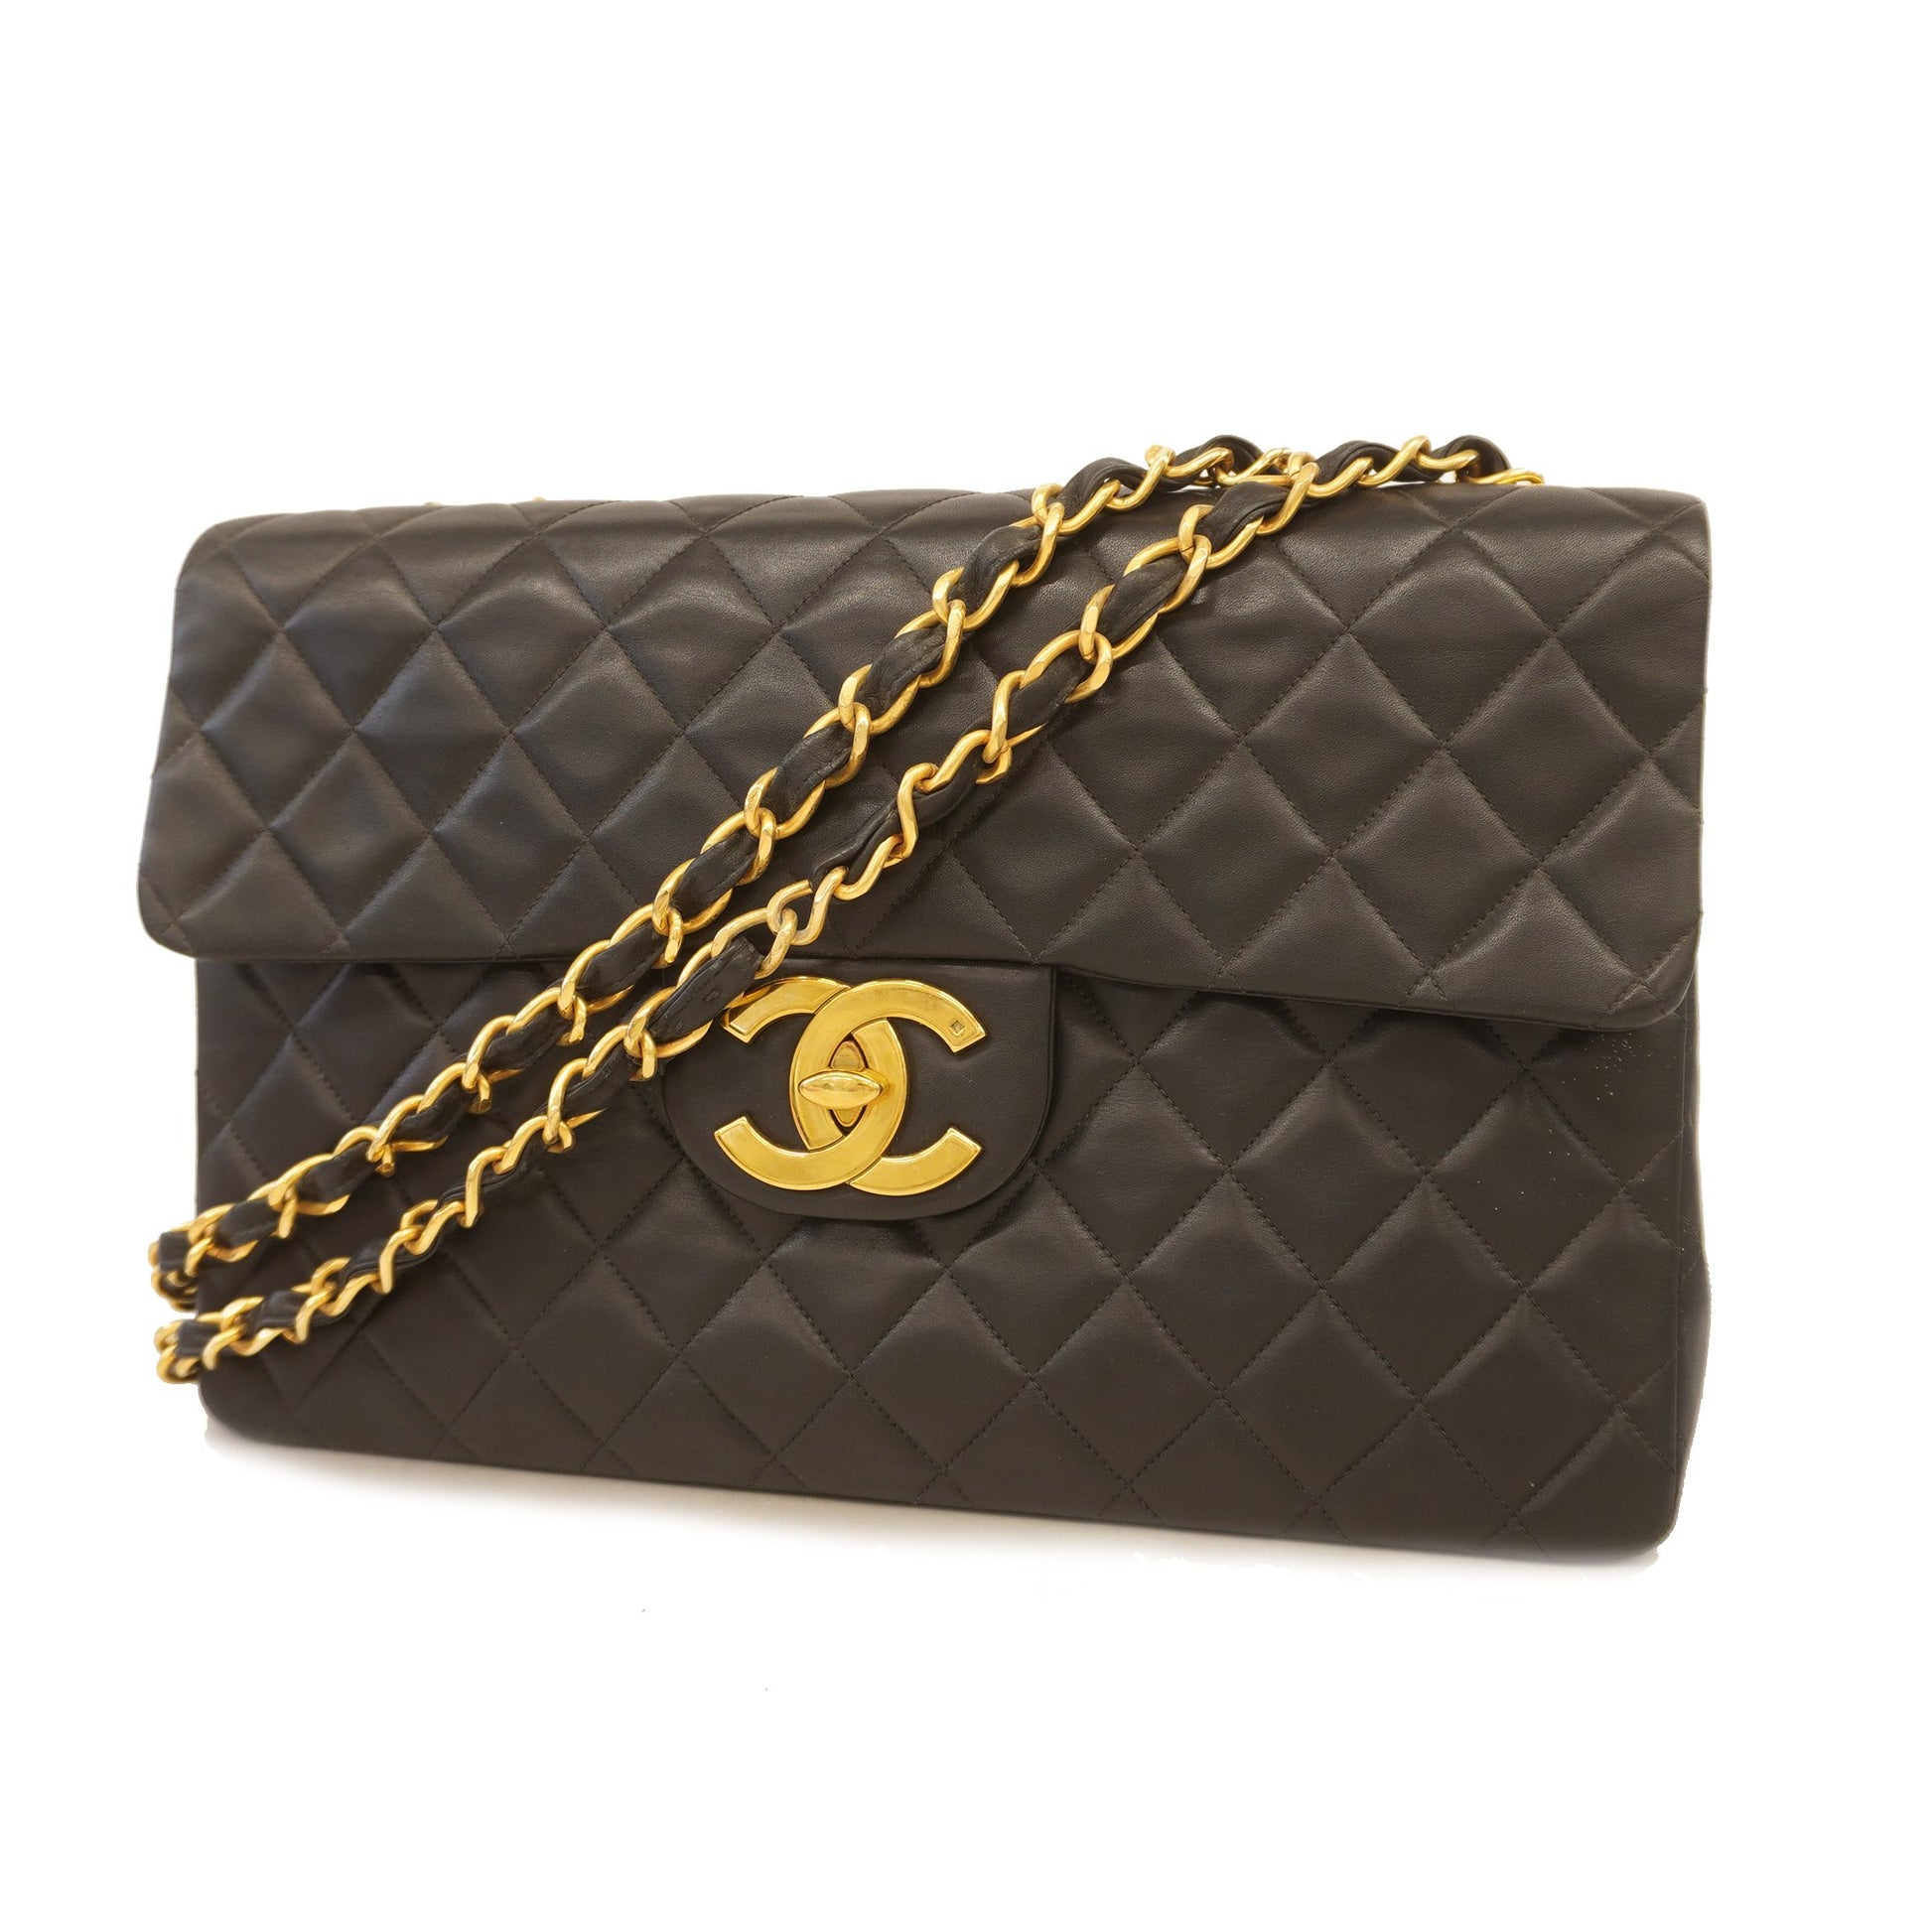 Chanel Matelasse Quilted Black Shimmer Leather Chain Shoulder Tote